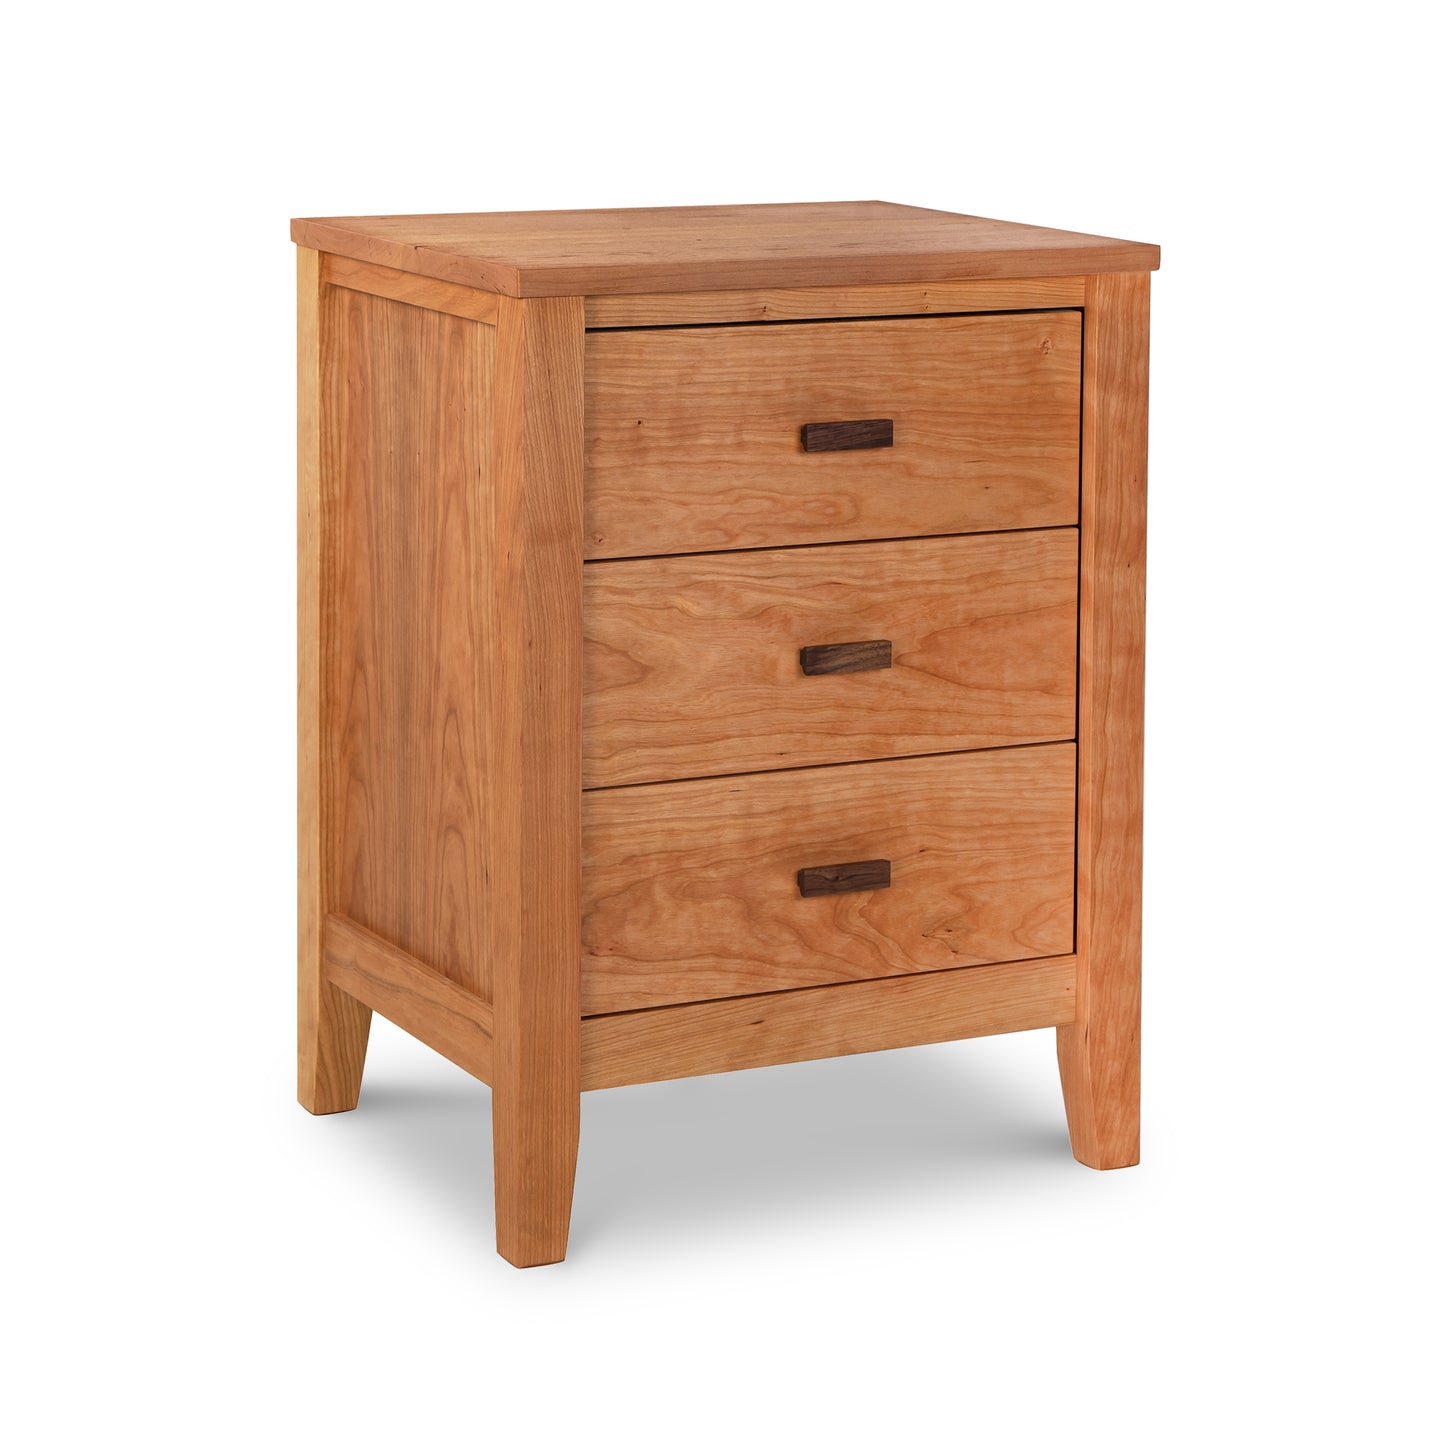 A wooden nightstand with three drawers.